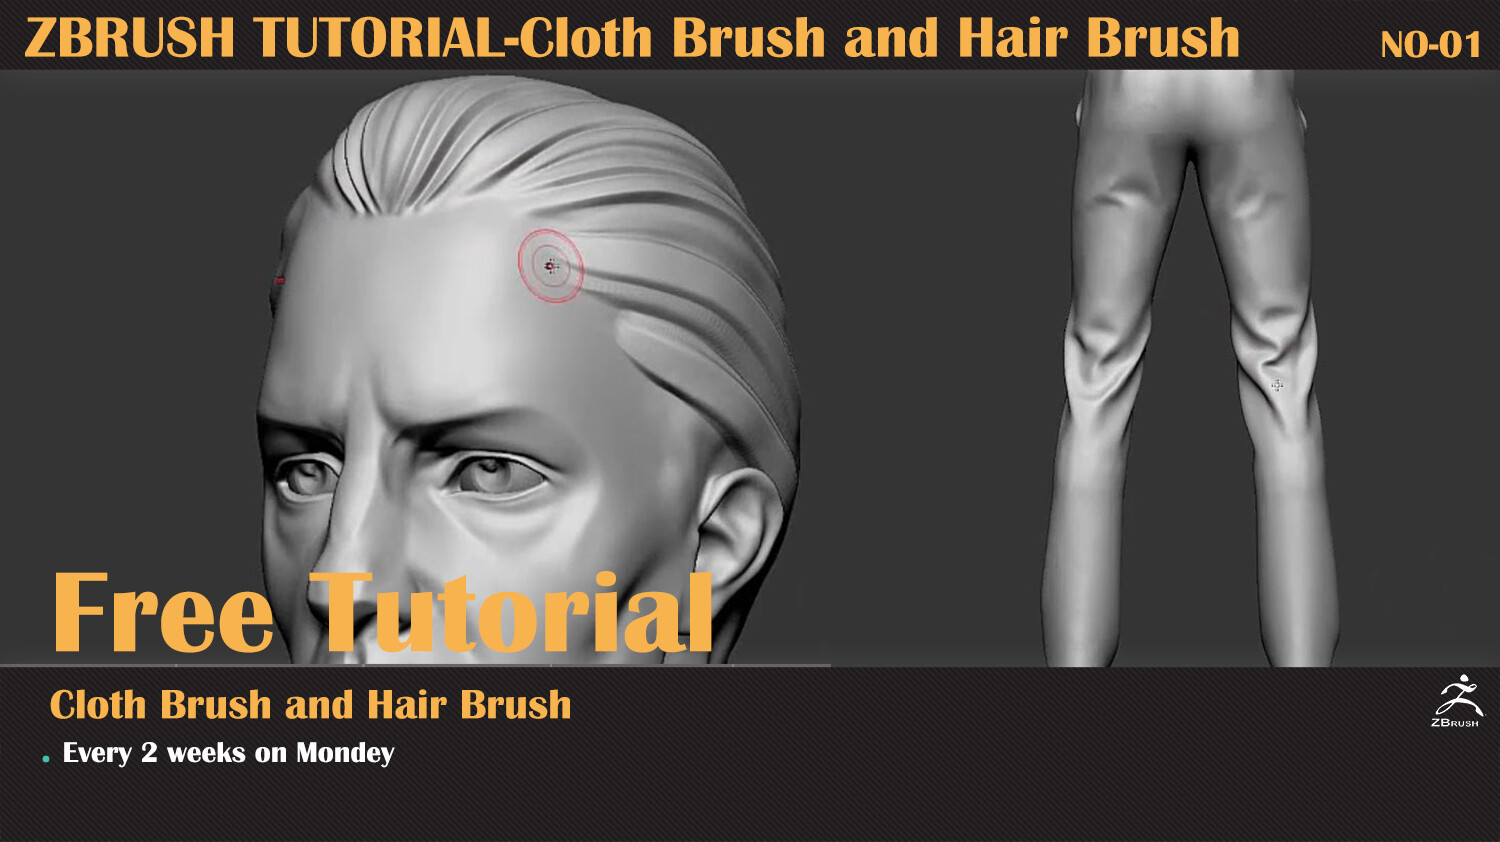 Cloth Brush and Hair Brush - ZBrushCentral